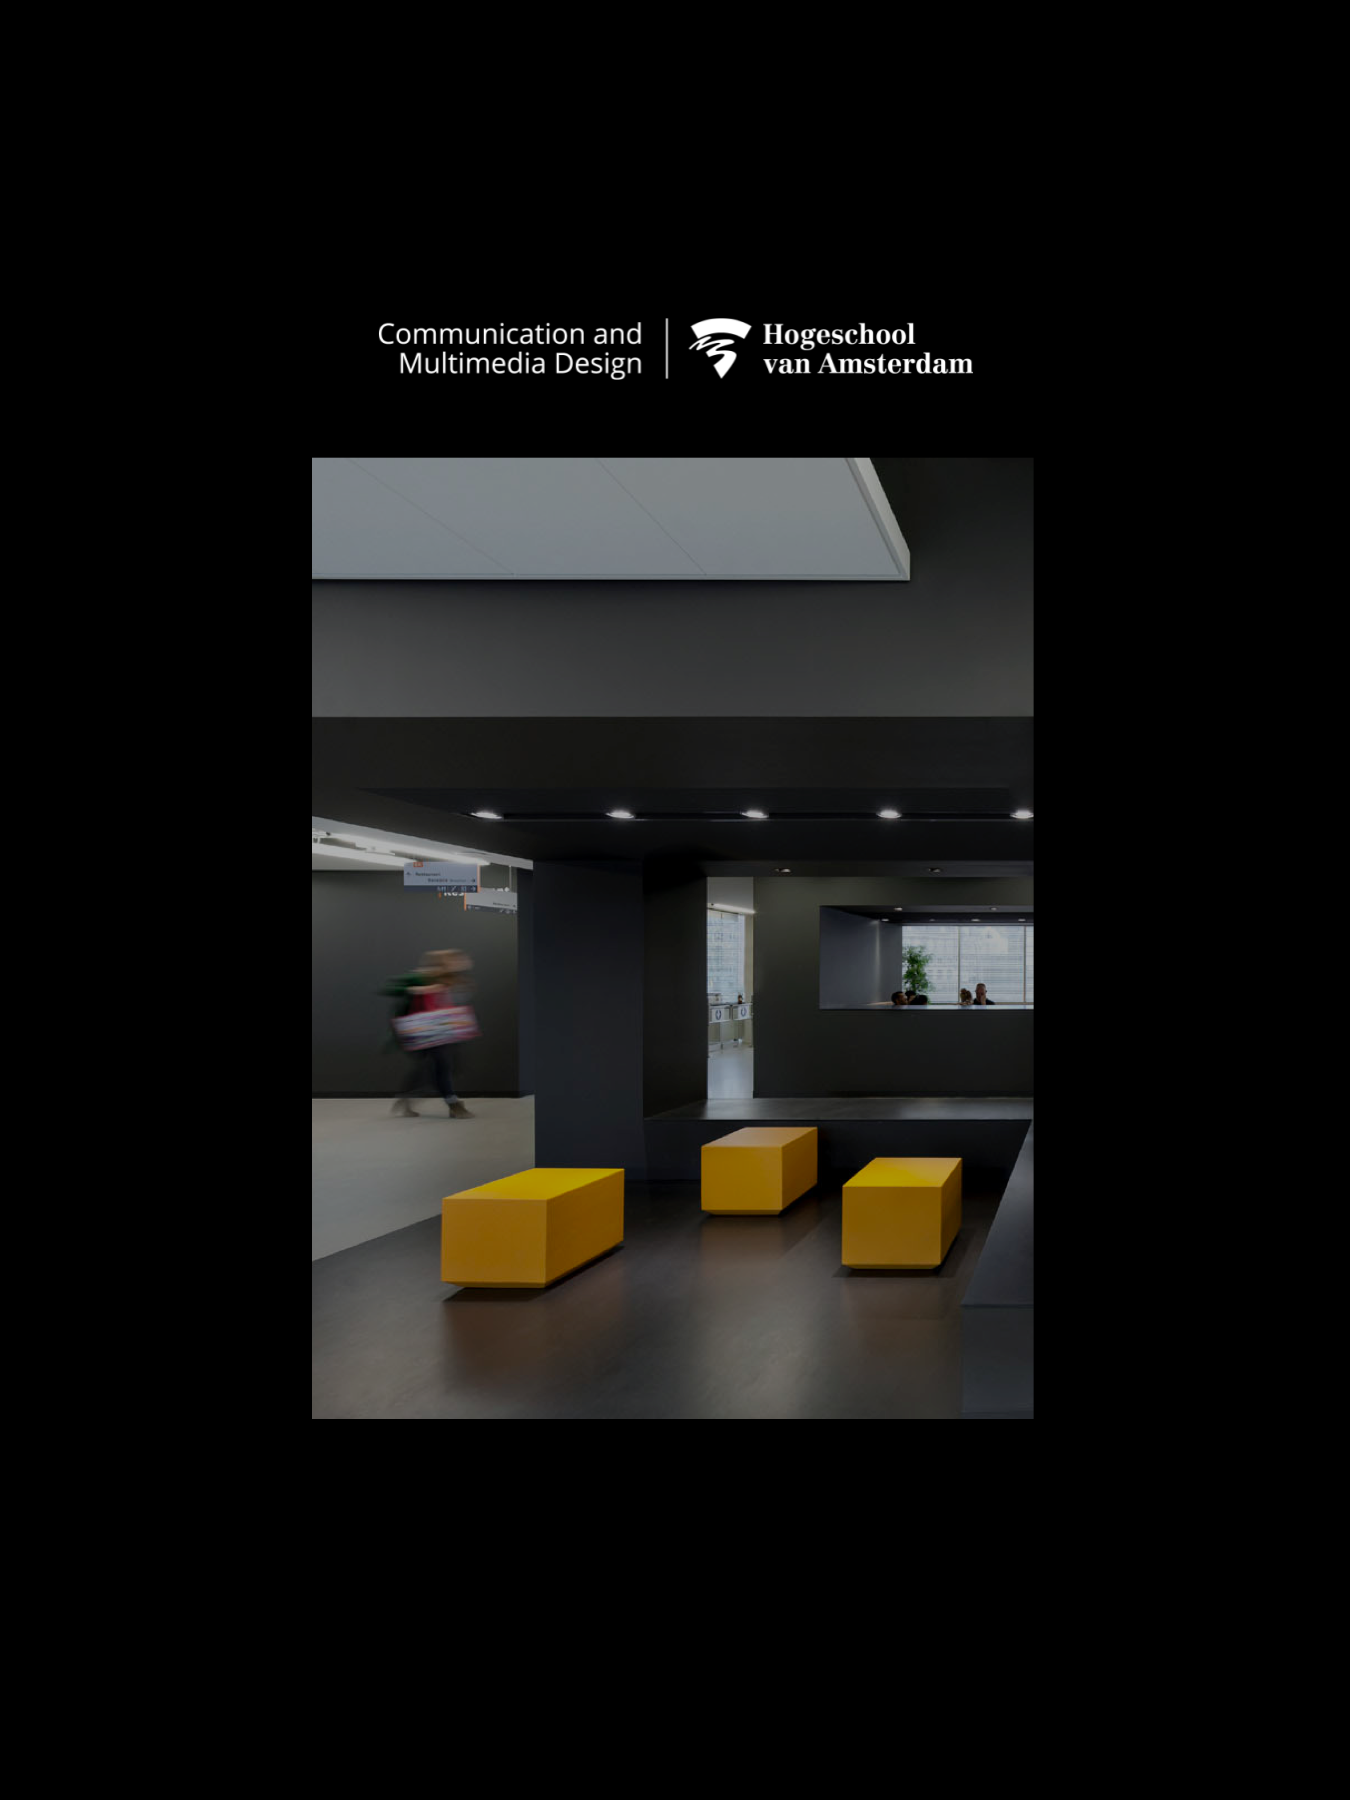 Cover image for post Teaching at the Amsterdam University of Applied Sciences